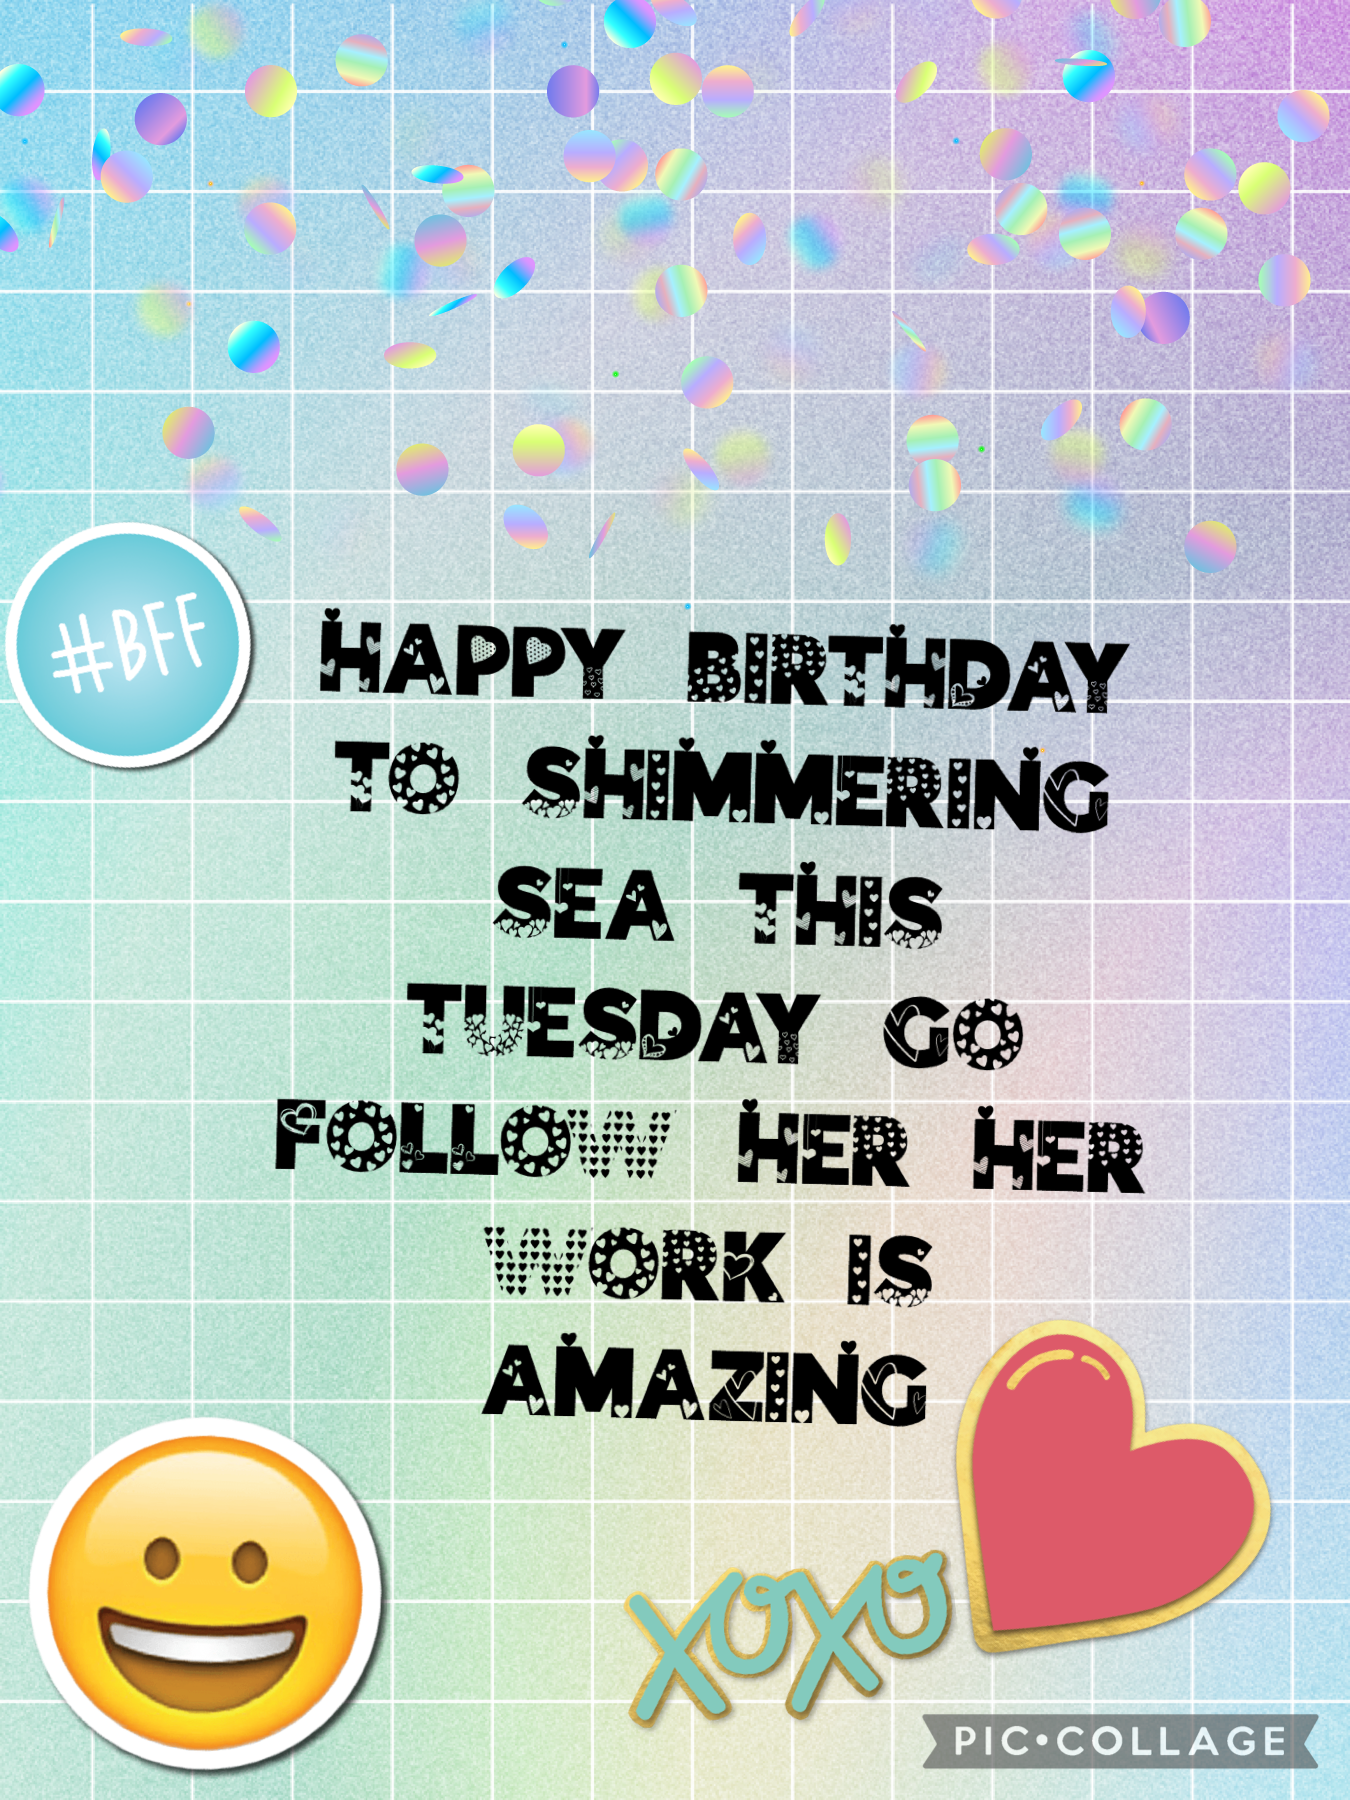 Go follow simmering simmering sea and in the comments, wish her happy birthday ! 